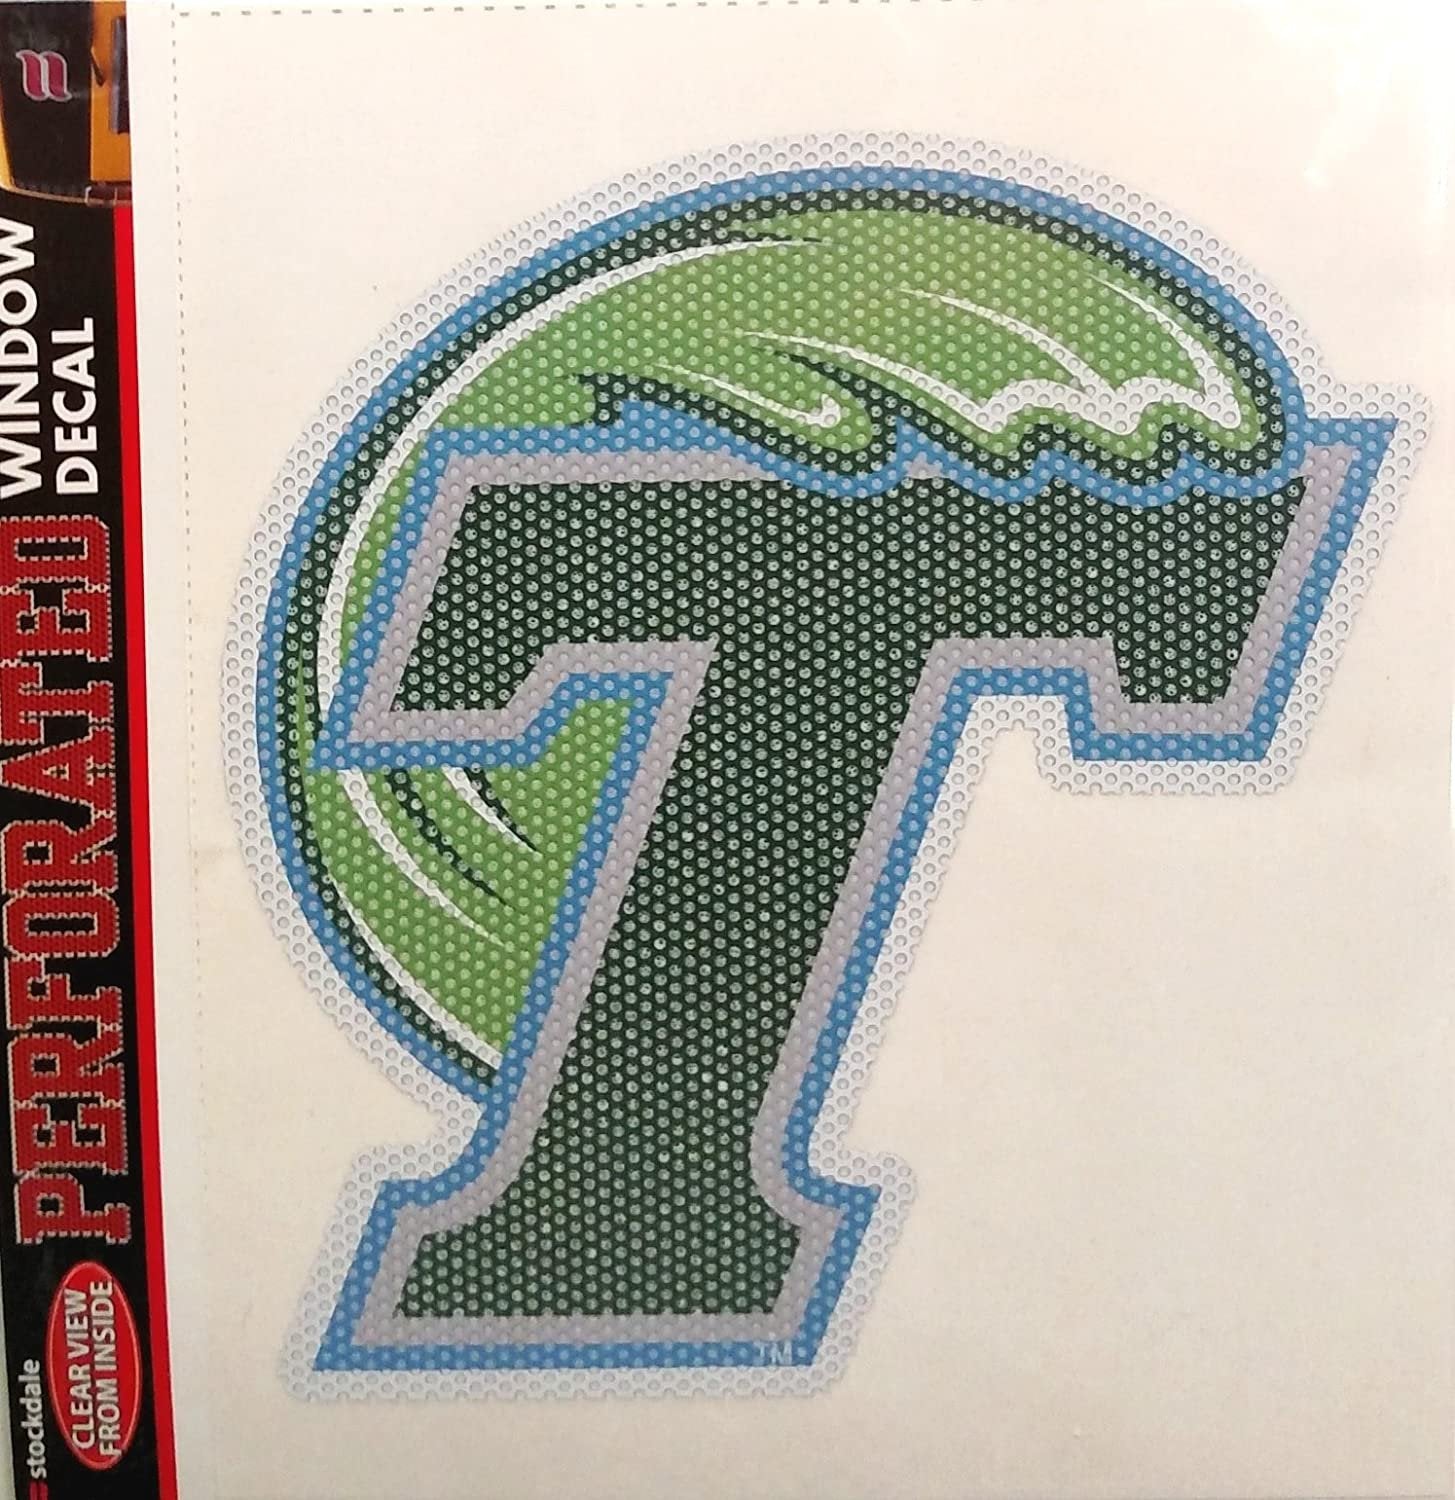 Tulane University Green Wave 8 Inch Preforated Window Film Decal Sticker, One-Way Vision, Adhesive Backing